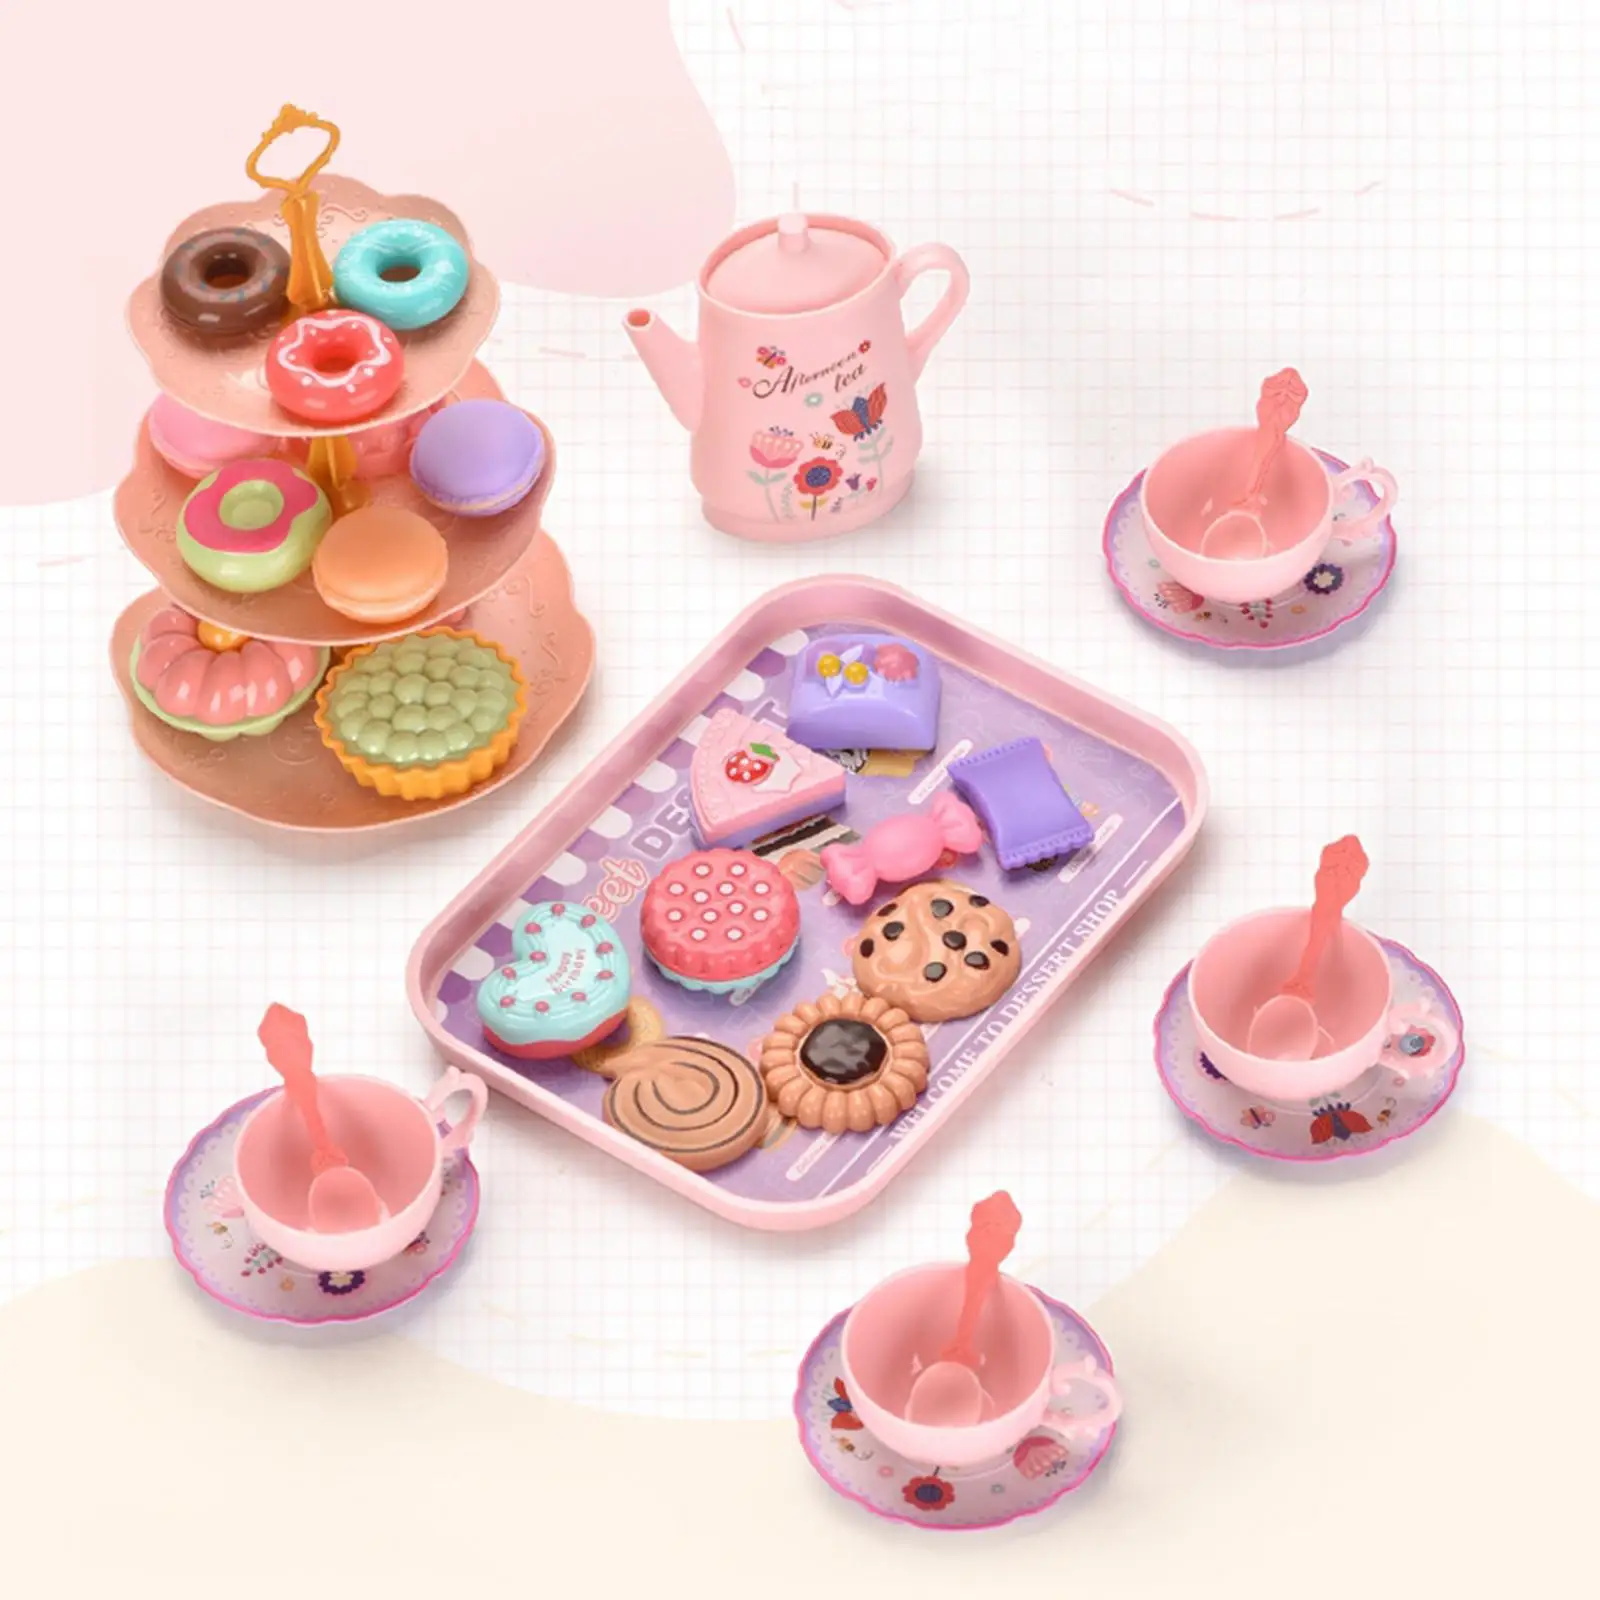 Play House Kitchen Afternoon Tea game Simulation Tea Cake Set for Boys